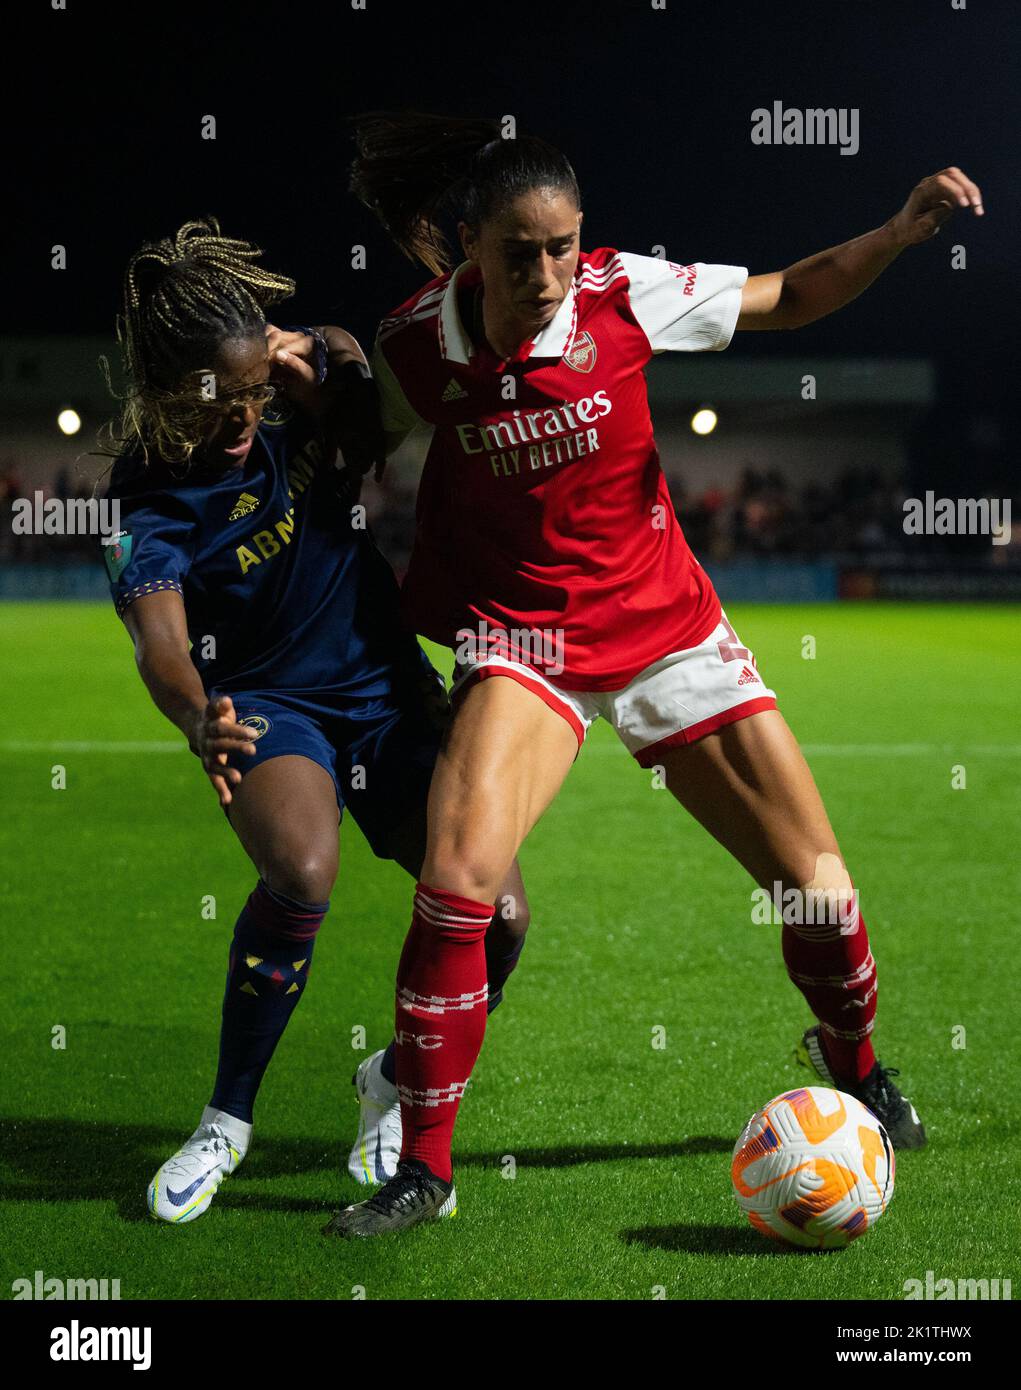 London, UK. 20th Sep, 2022. Rafaelle Souza (2 Arsenal) and Liza van der Most (2 Ajax) battle for the ball during the UEFA Womens Champions League Qualifying Round 2 game between Arsenal and Ajax at Meadow Park in London, England. (James Whitehead/SPP) Credit: SPP Sport Press Photo. /Alamy Live News Stock Photo